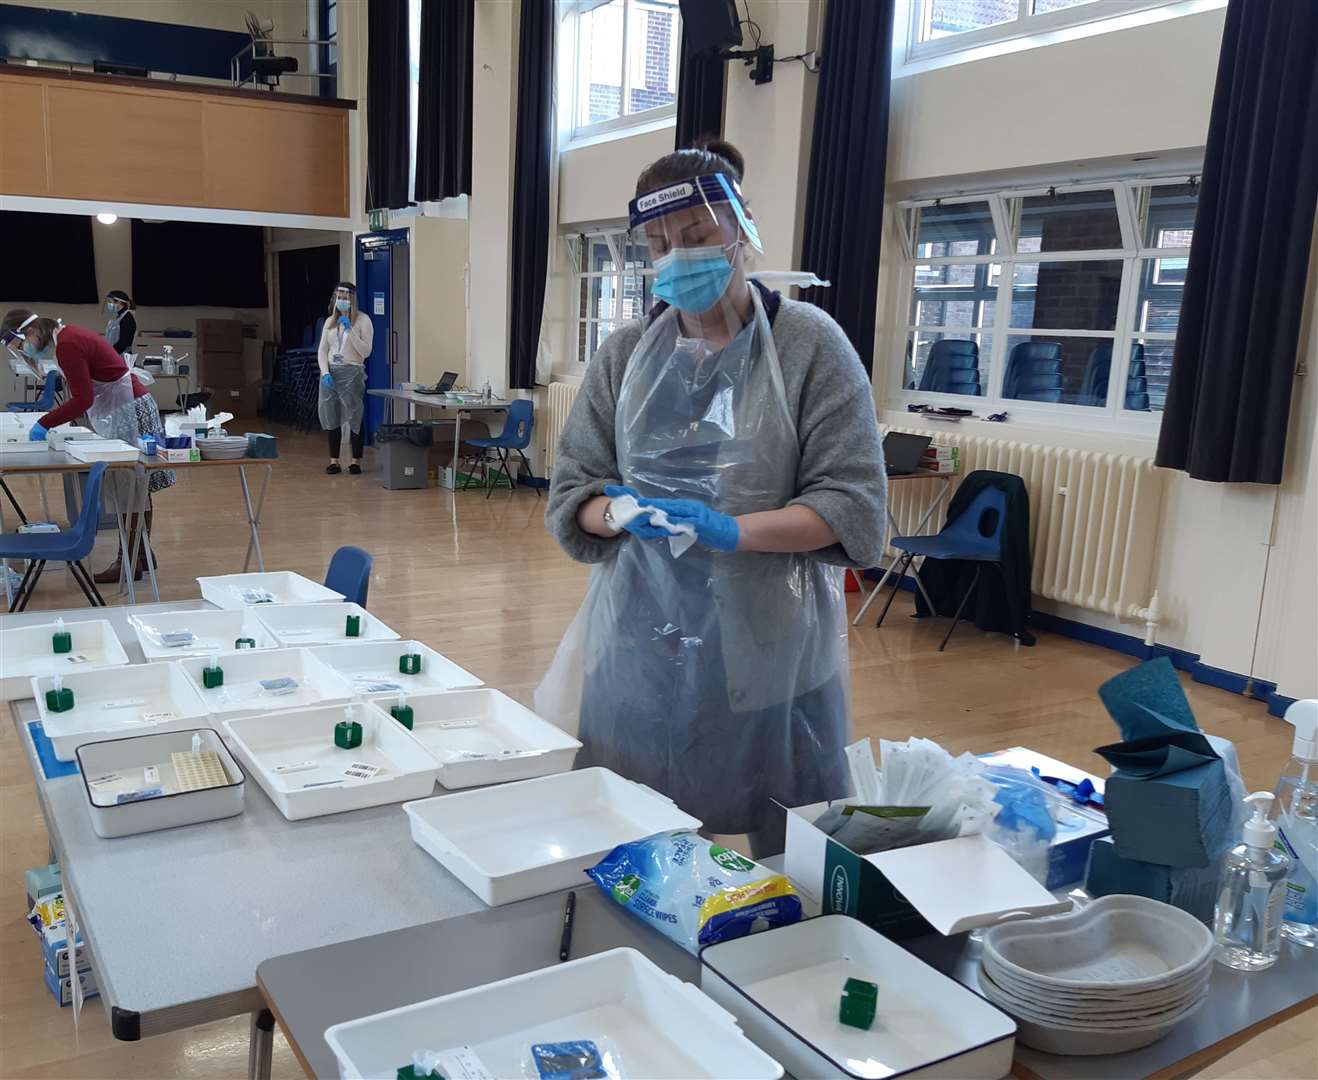 A member of staff at work in the testing site at Maidstone Grammar School for Girls